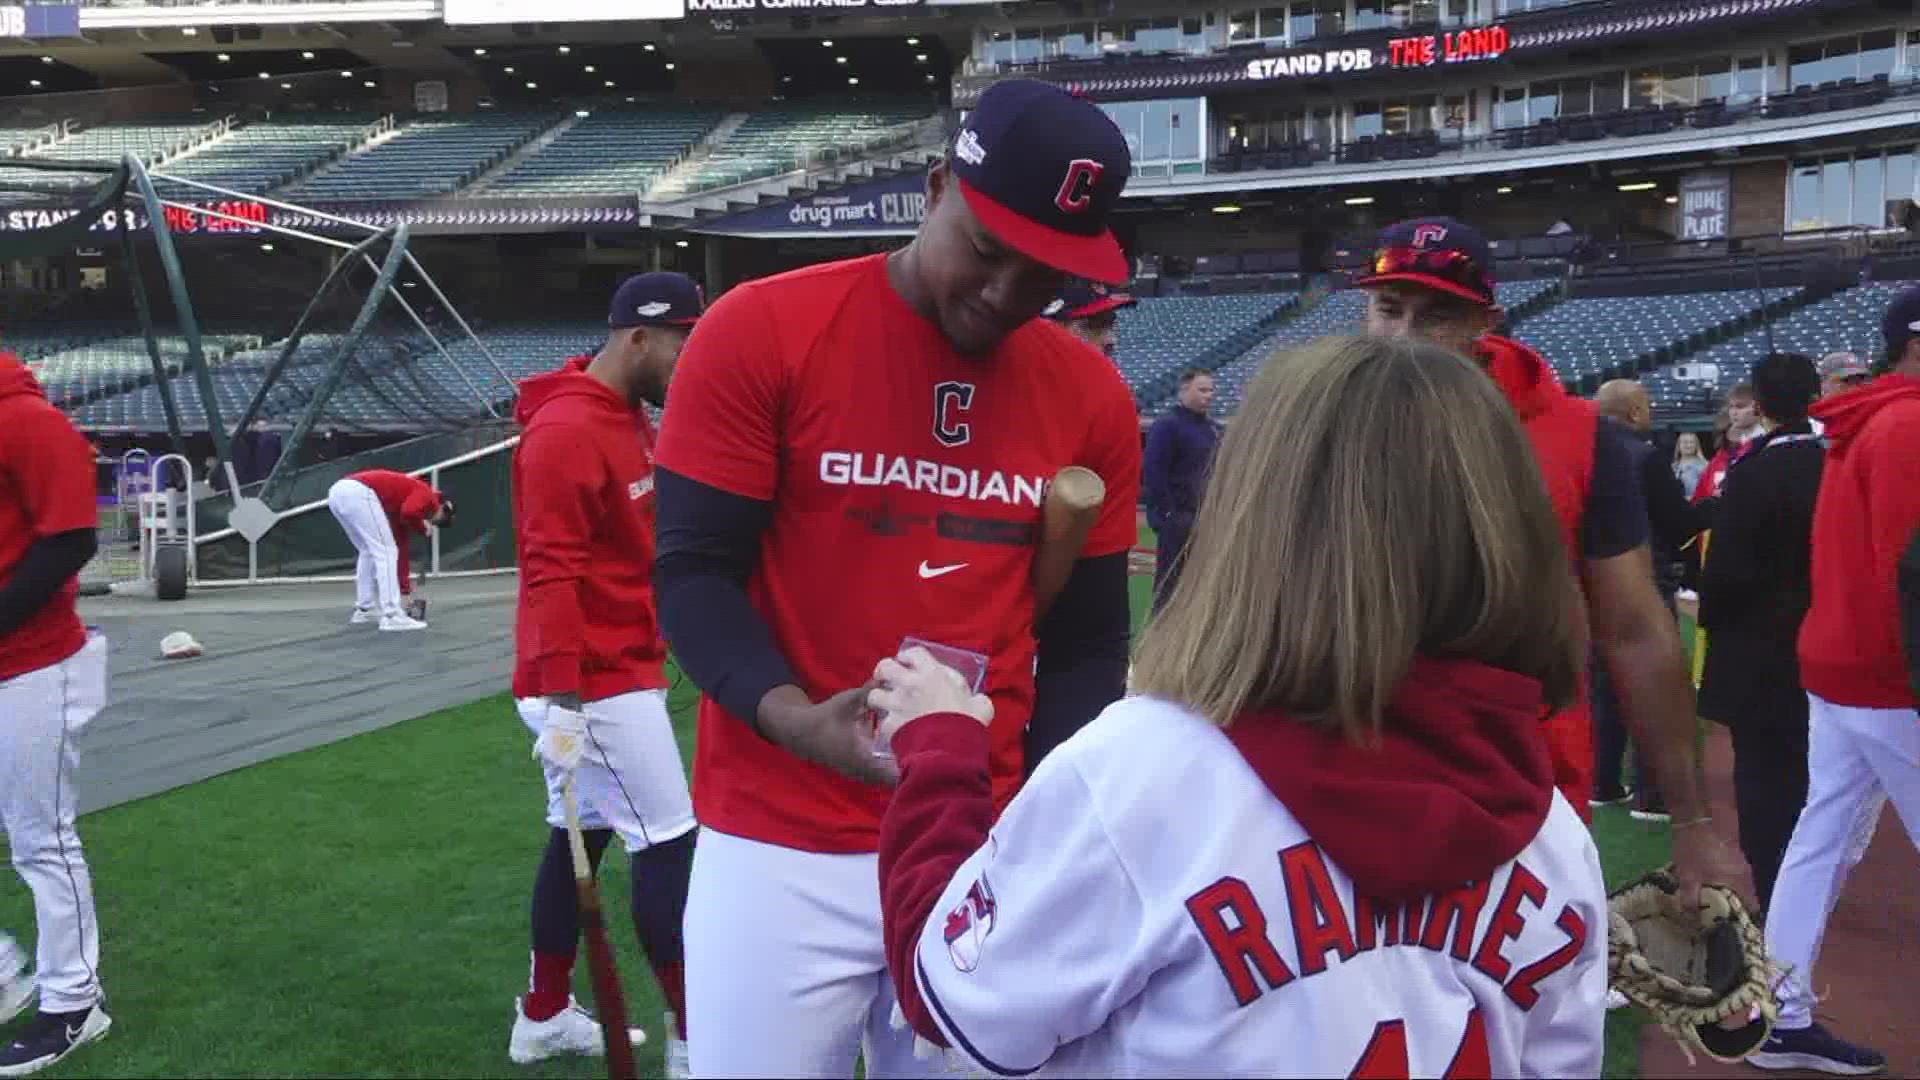 16-year-old Megan Forshey finally got to meet Oscar Gonzalez after batting practice before game 3. She walked away with yet another memorable experience.